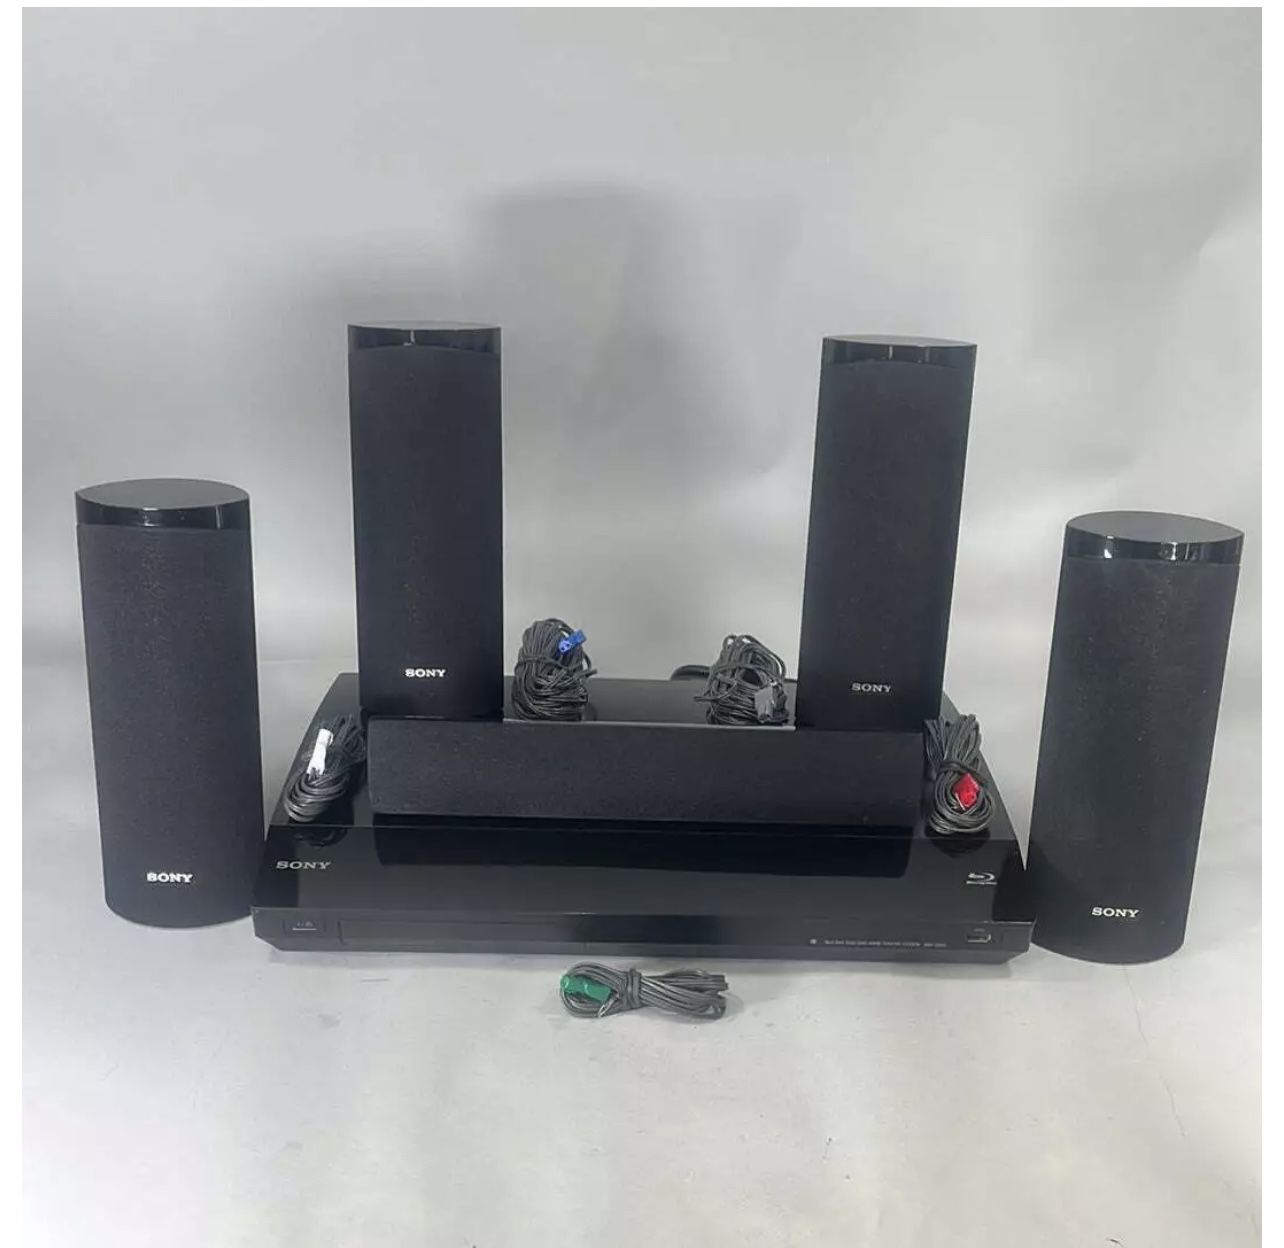 Sony BDV-T58 Blu-ray/DVD Home Theater System And Subwoofer